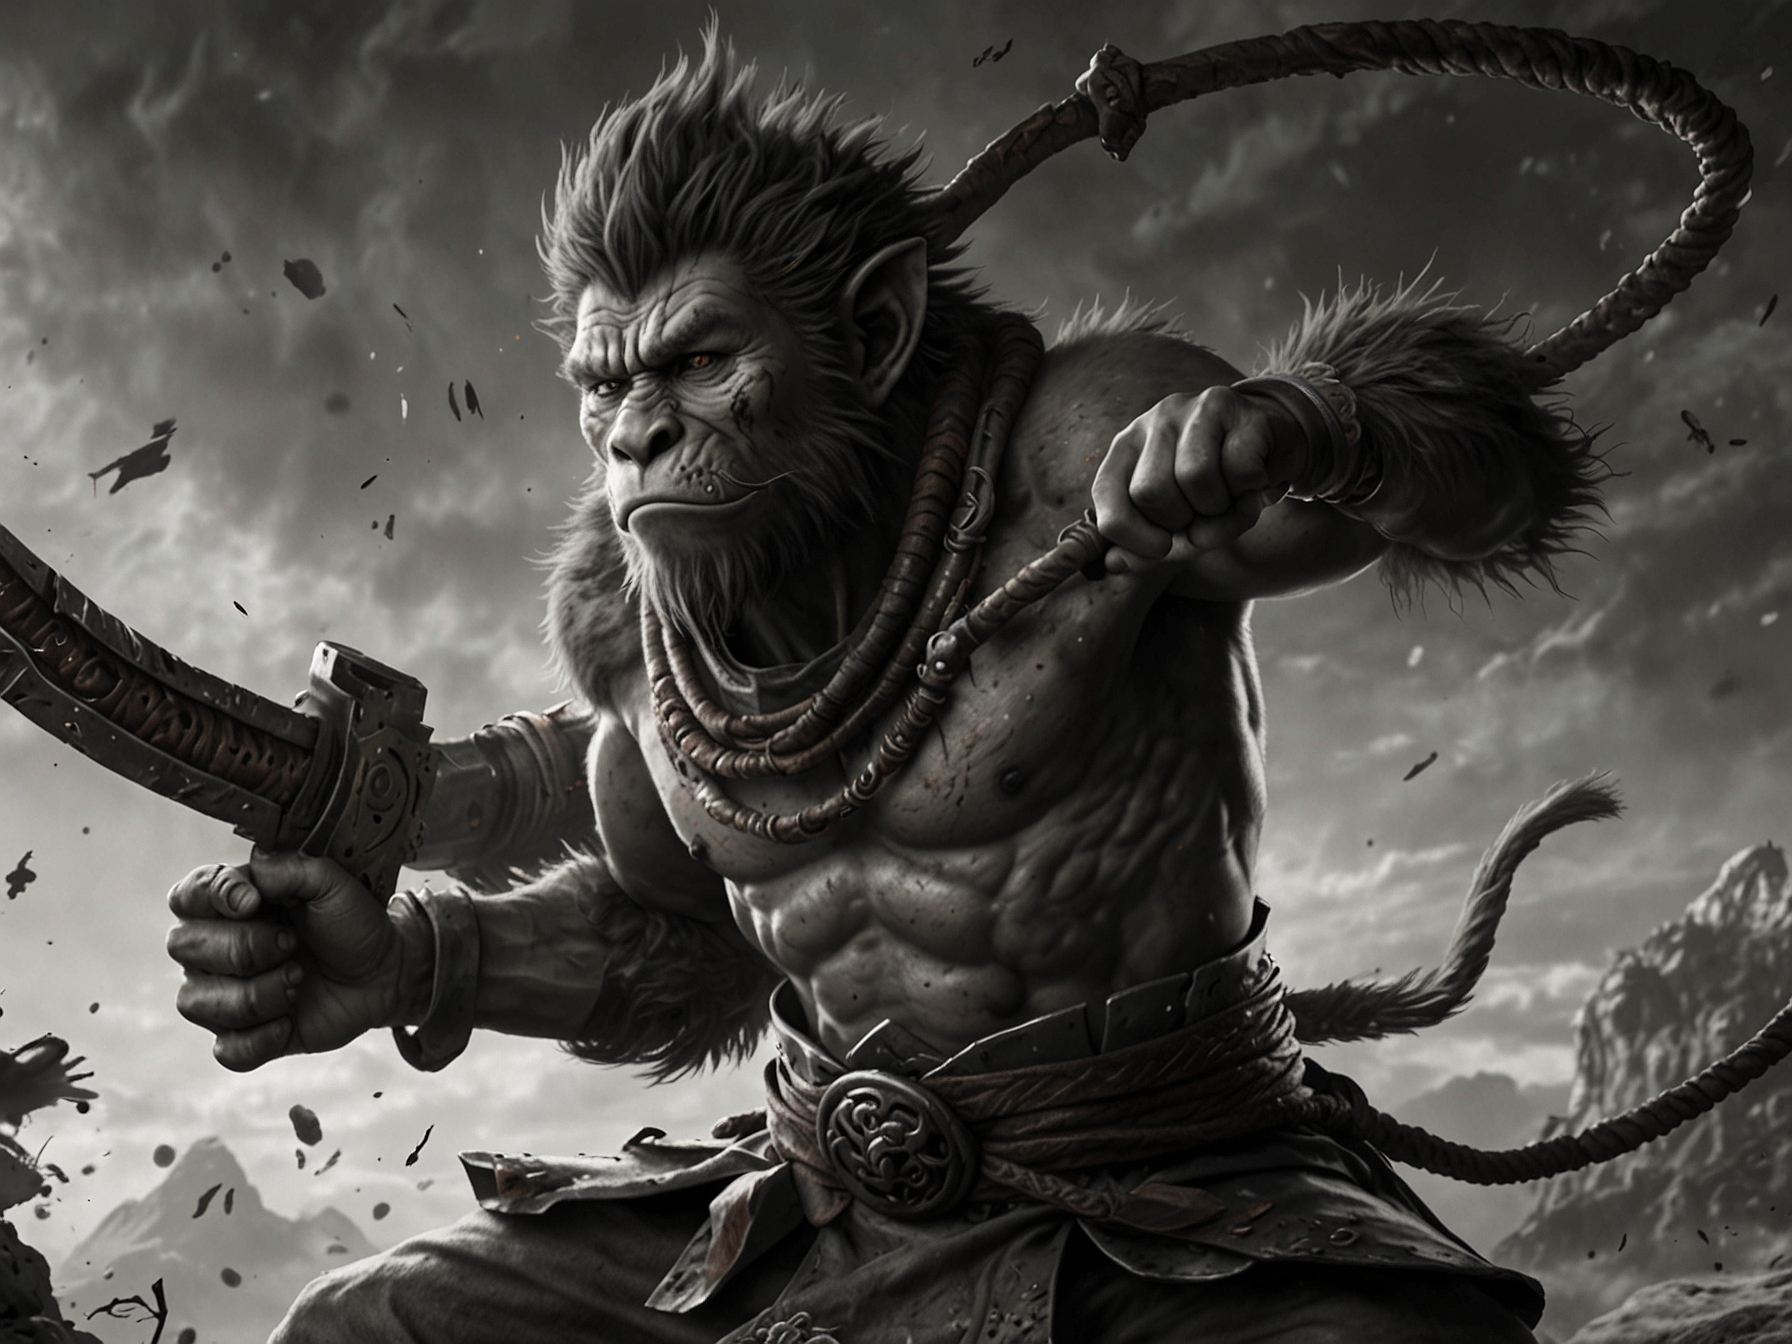 A detailed shot of Wukong in combat, demonstrating the game's fast-paced and complex combat mechanics.